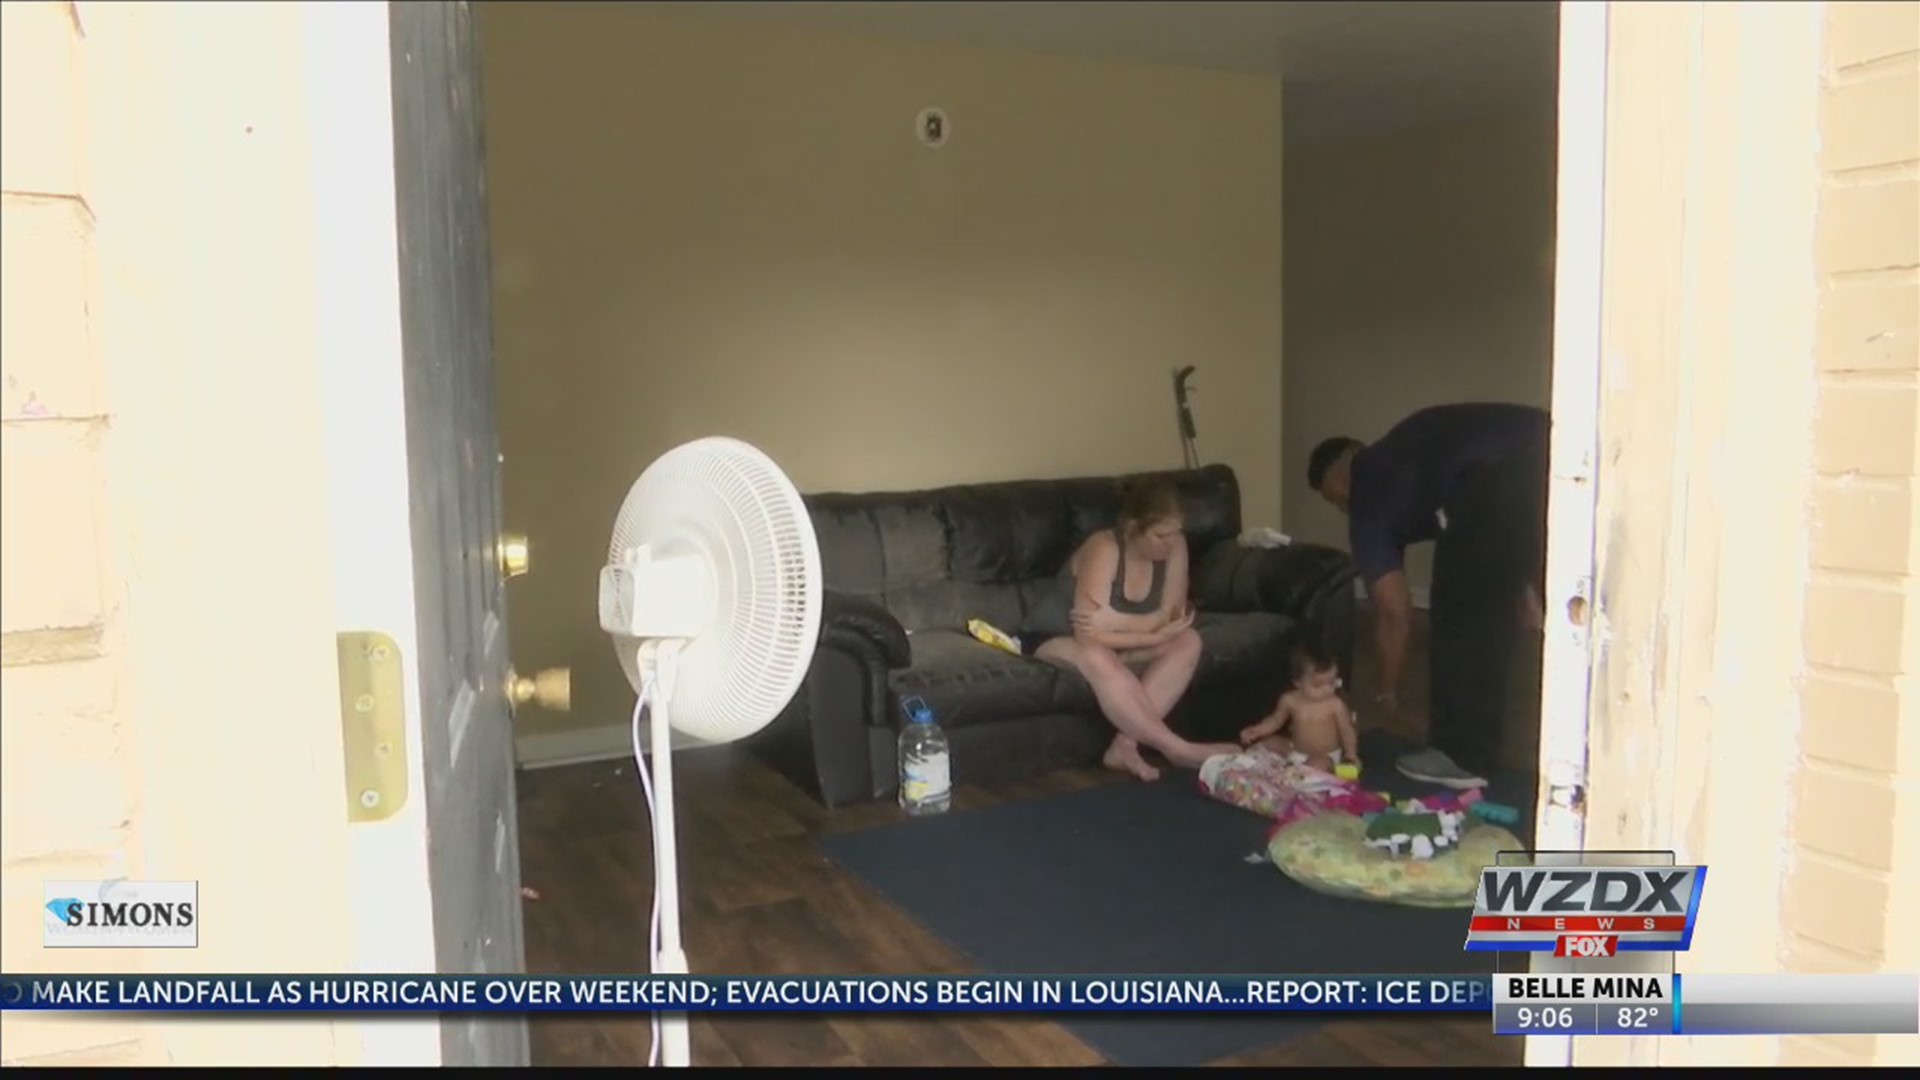 Huntsville tenants say they have gone without A/C for nearly two weeks.